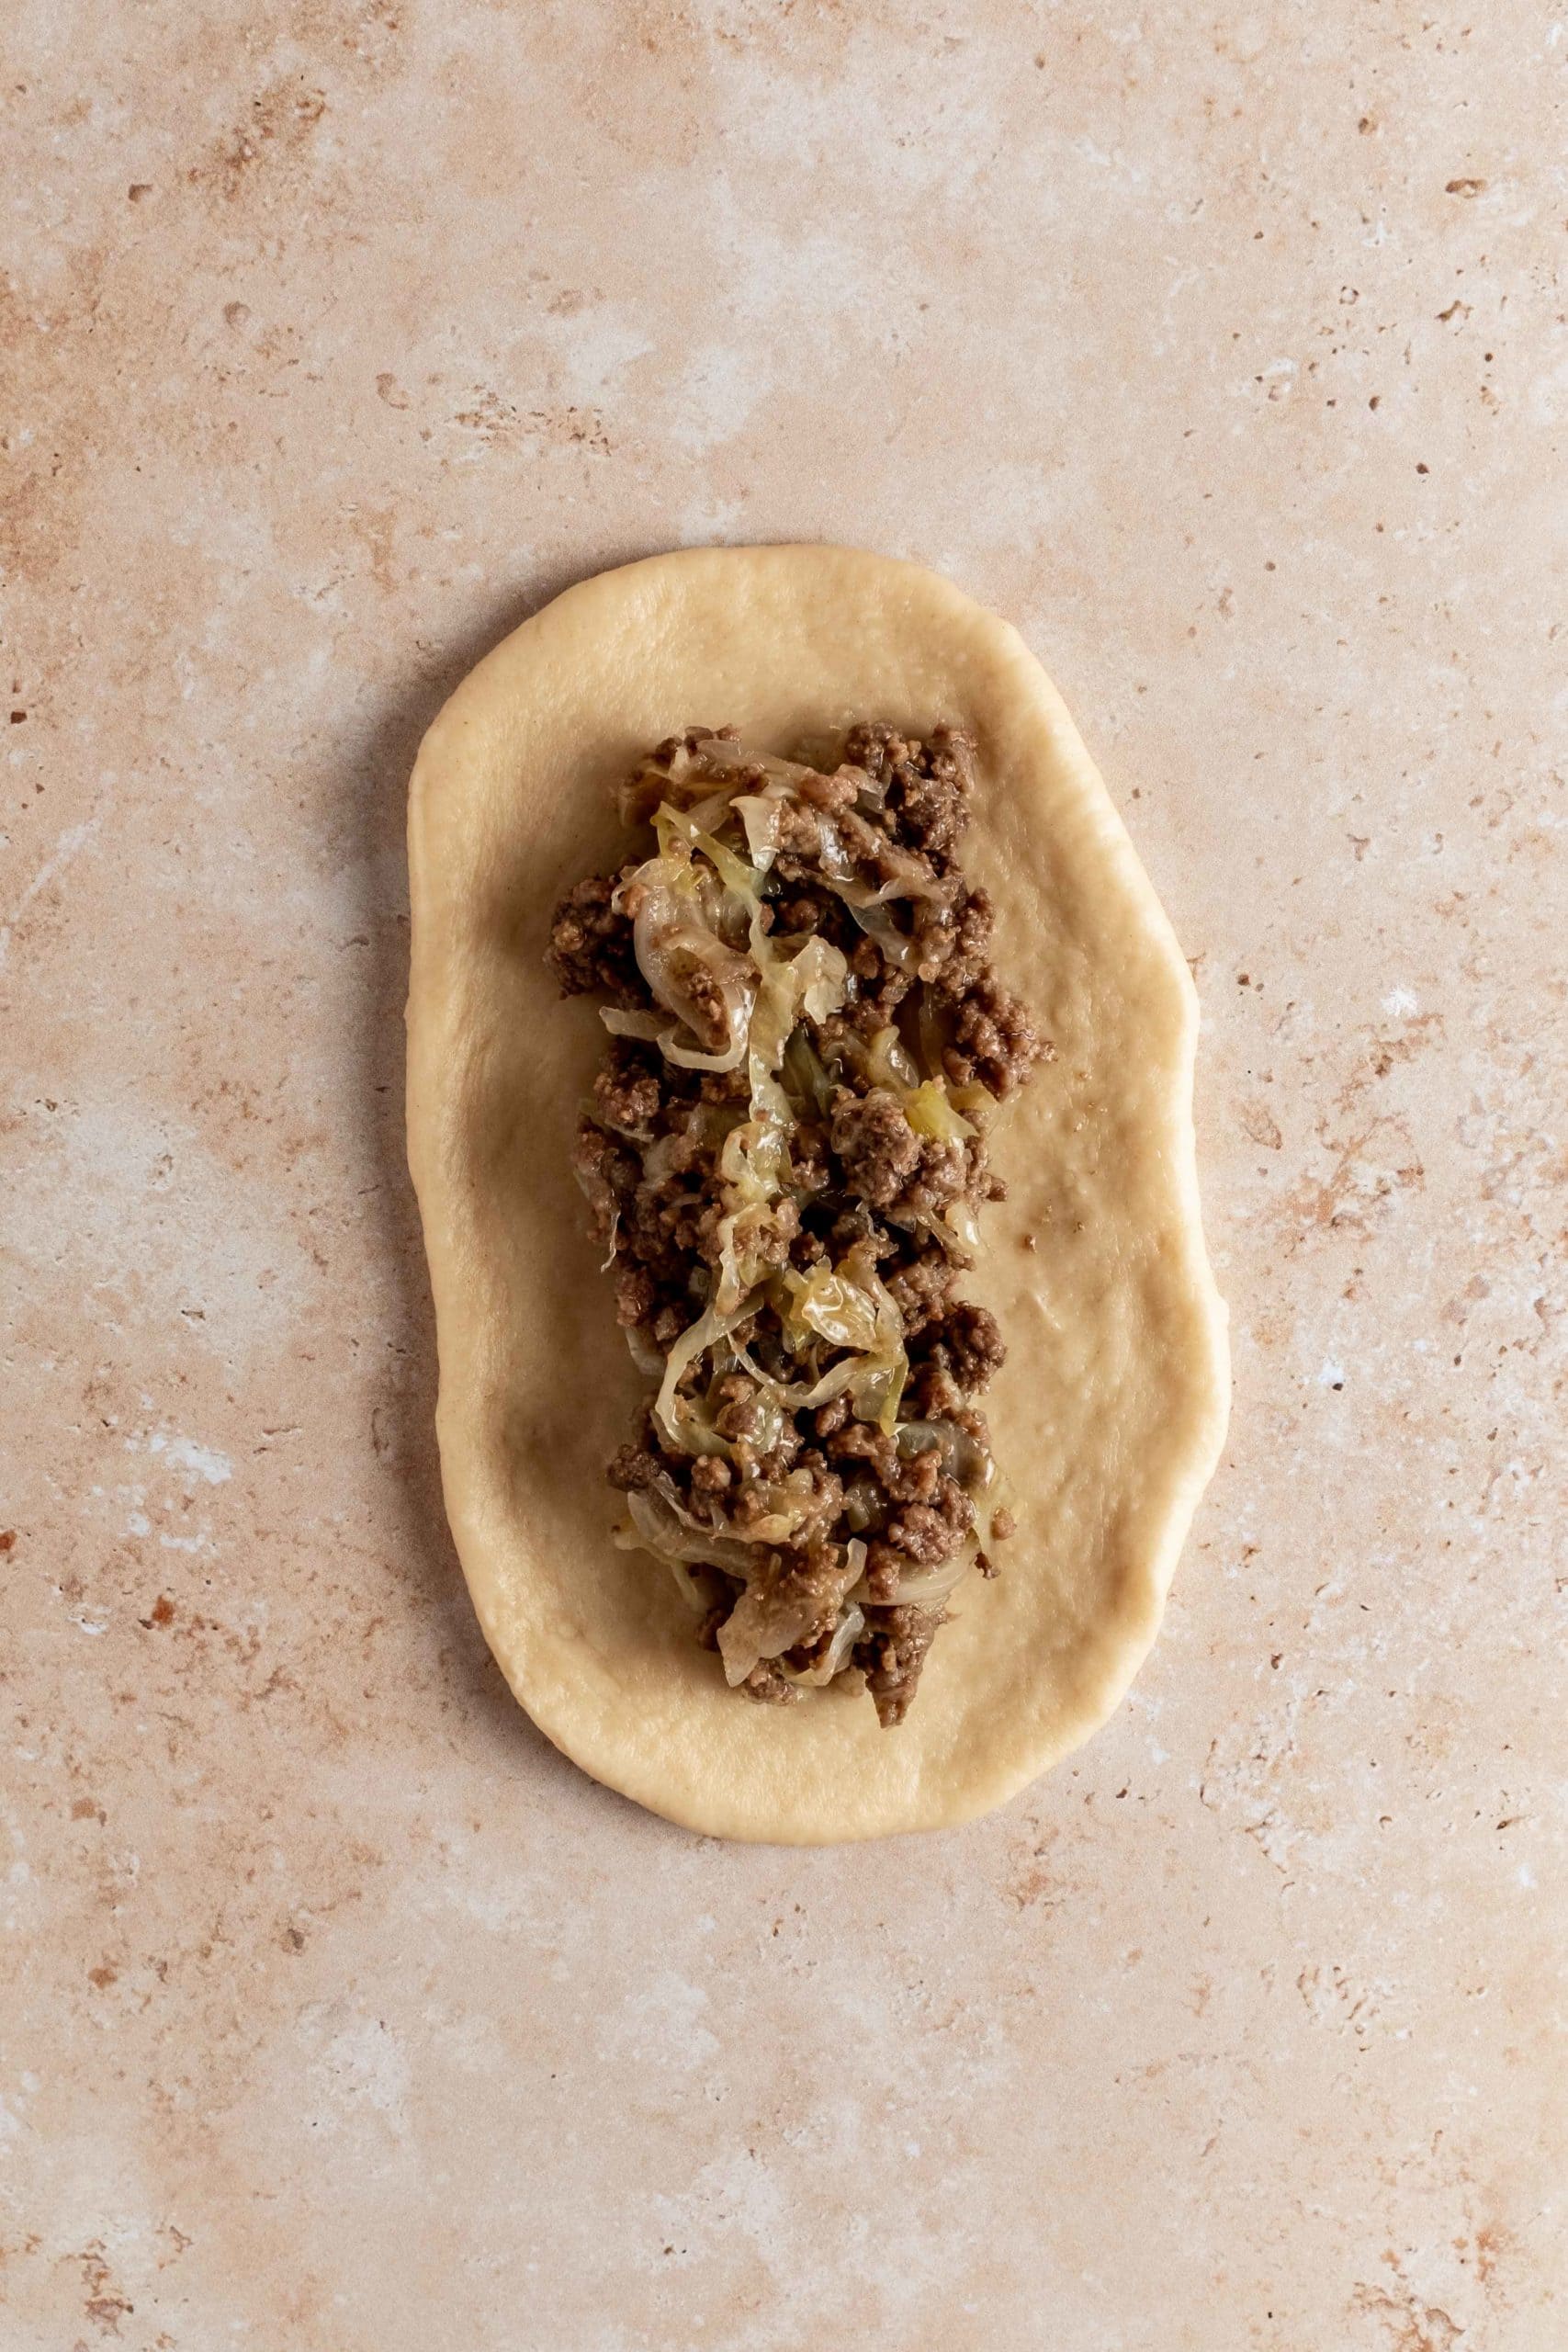 rolled out dough with beef and cabbage mixture